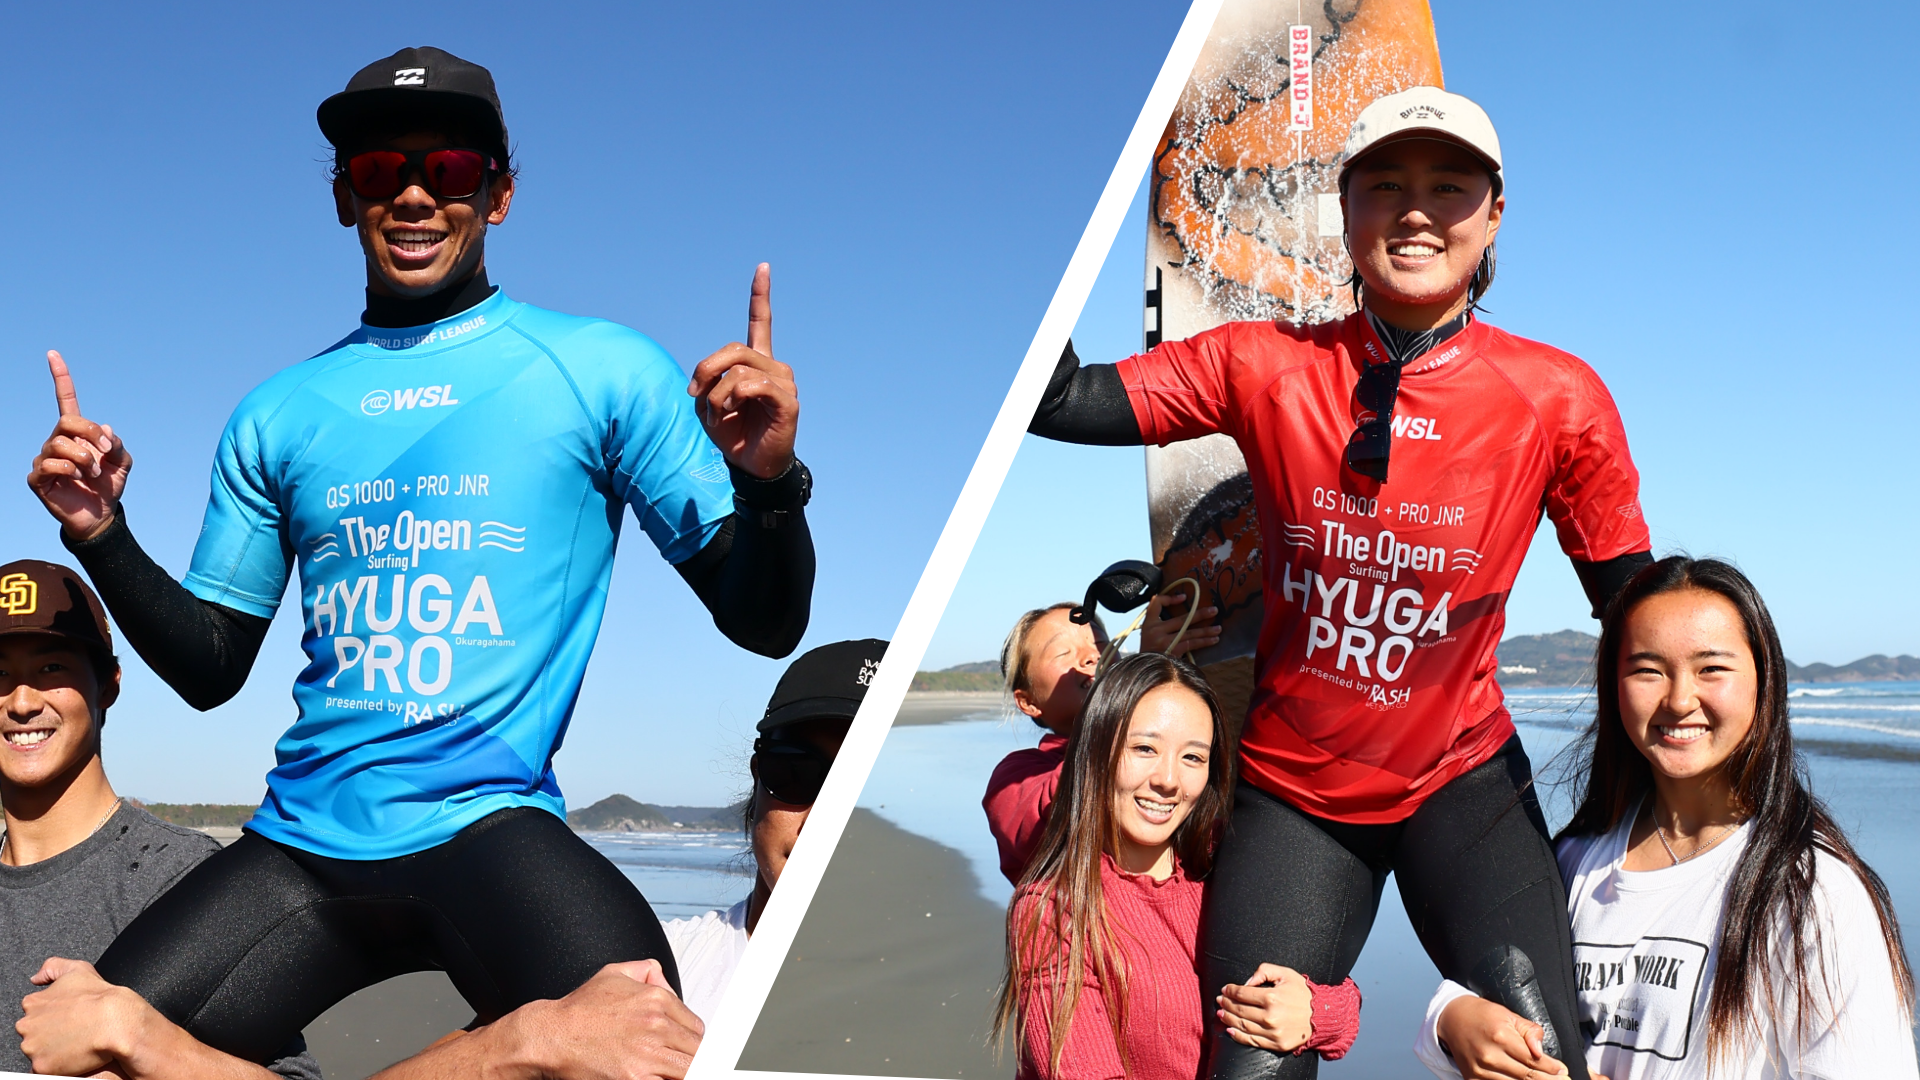 The Open Surfing HYUGA PRO FinalsDay PHOTO更新！